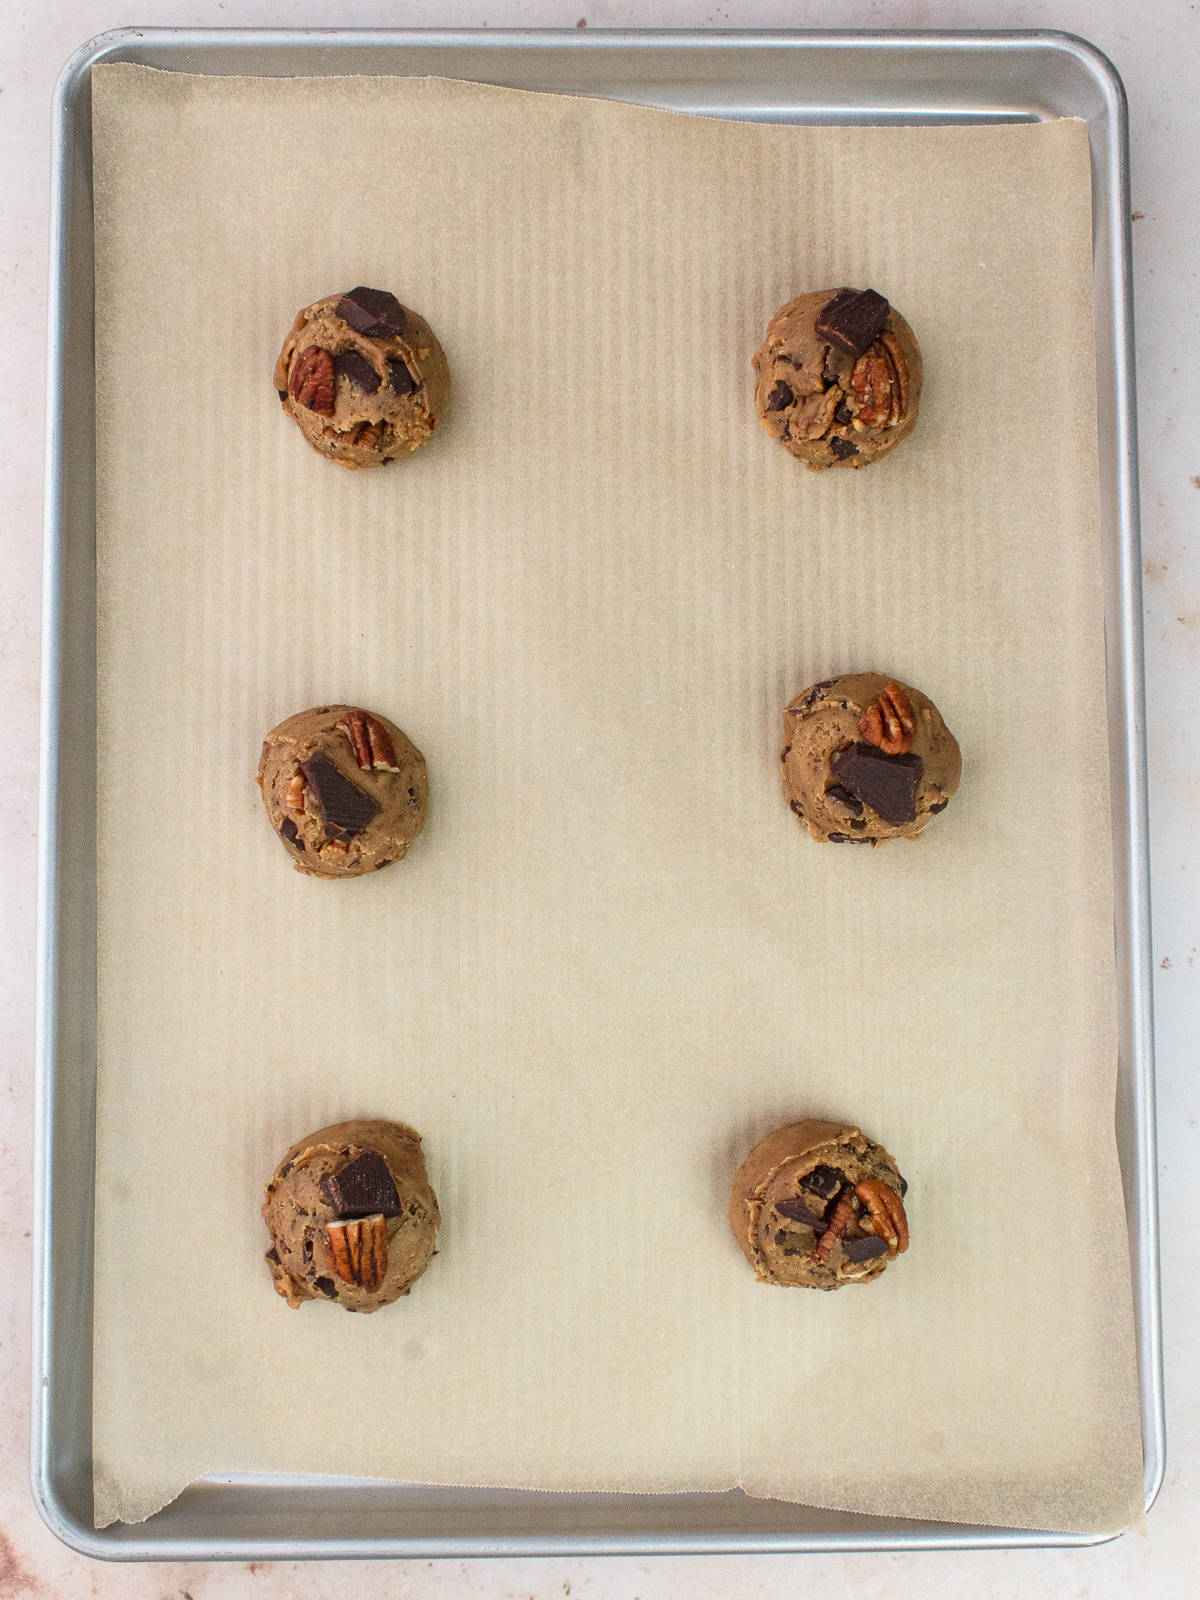 Cookie dough on parchment lined cookie sheet